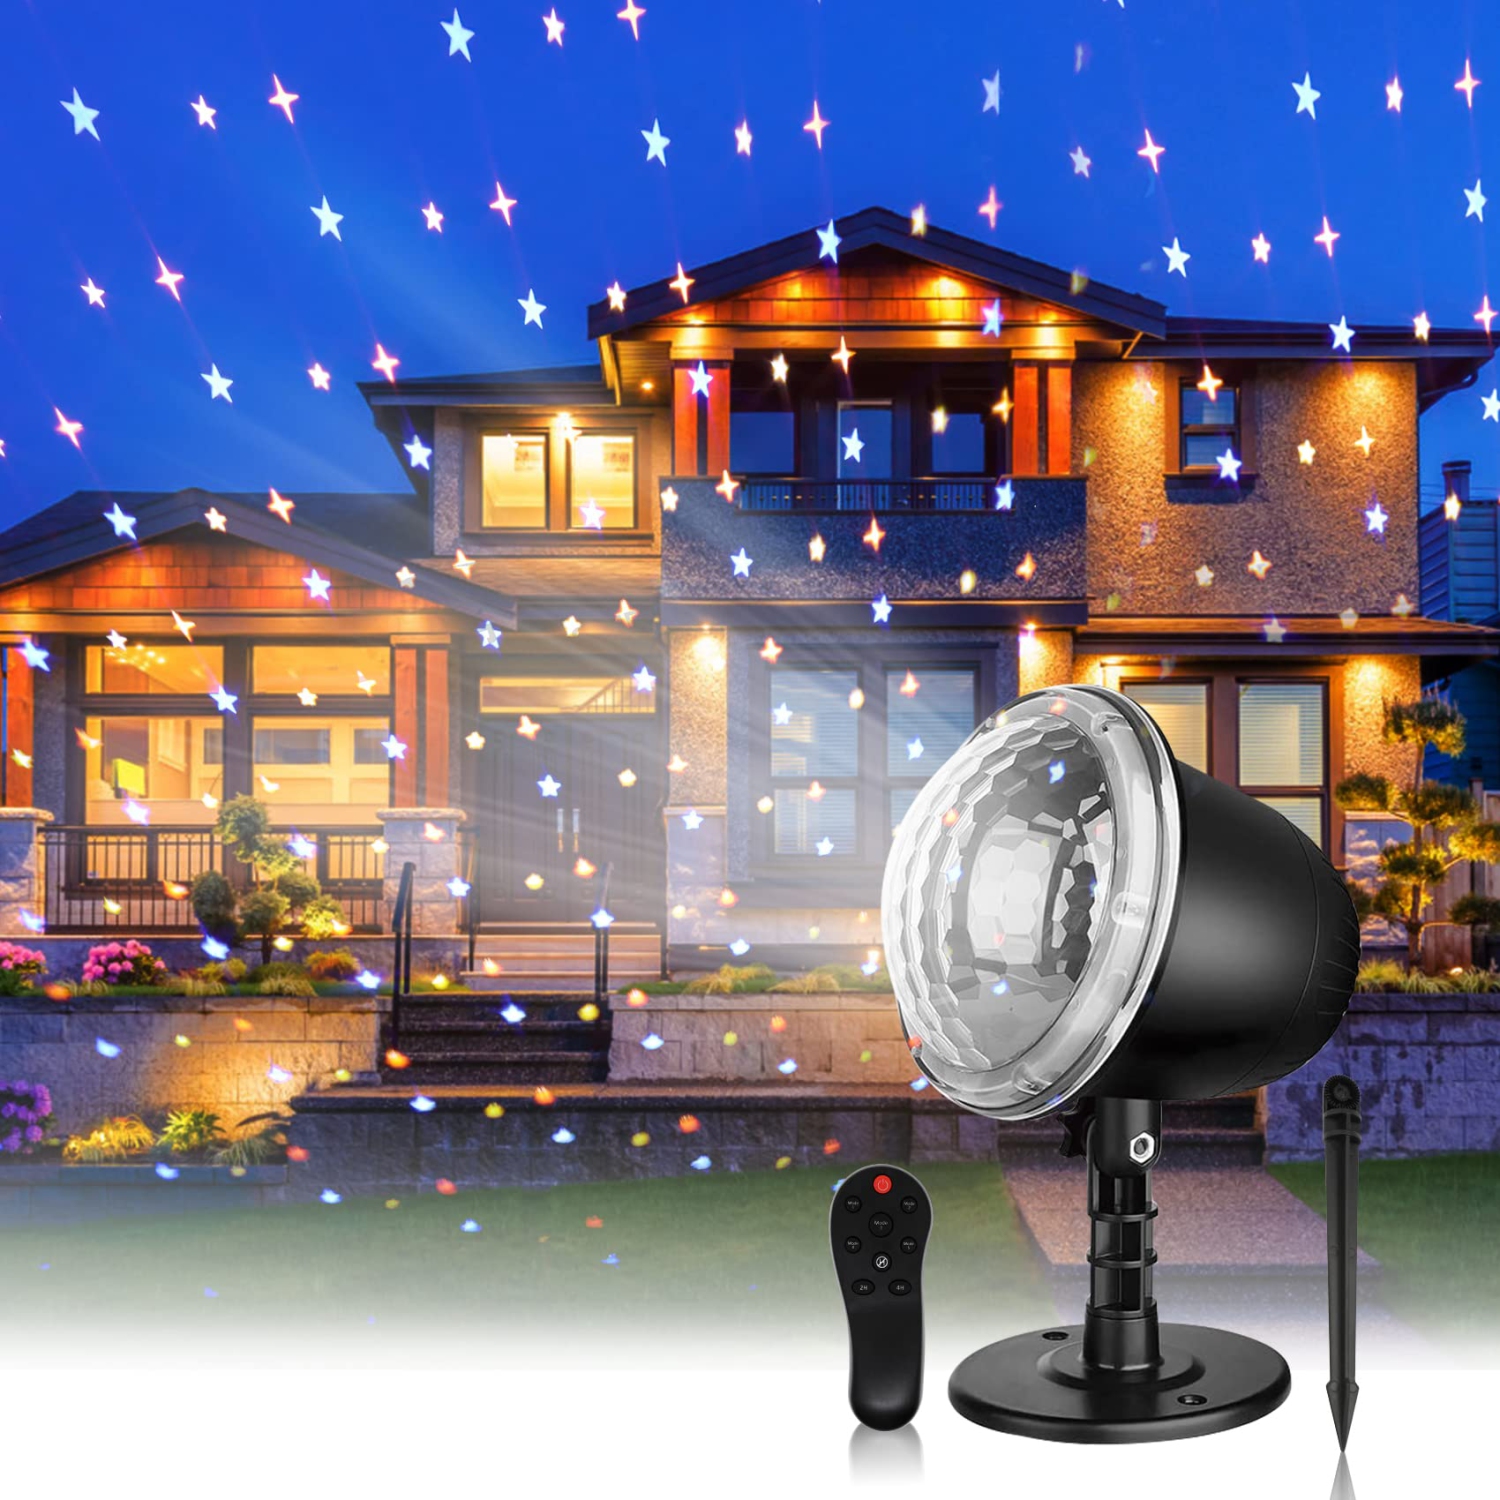 Star Night Light Projector, Elec3 Star Projector for Kids with Remote Control and Timer Indoor Outdoor Holiday Projector for